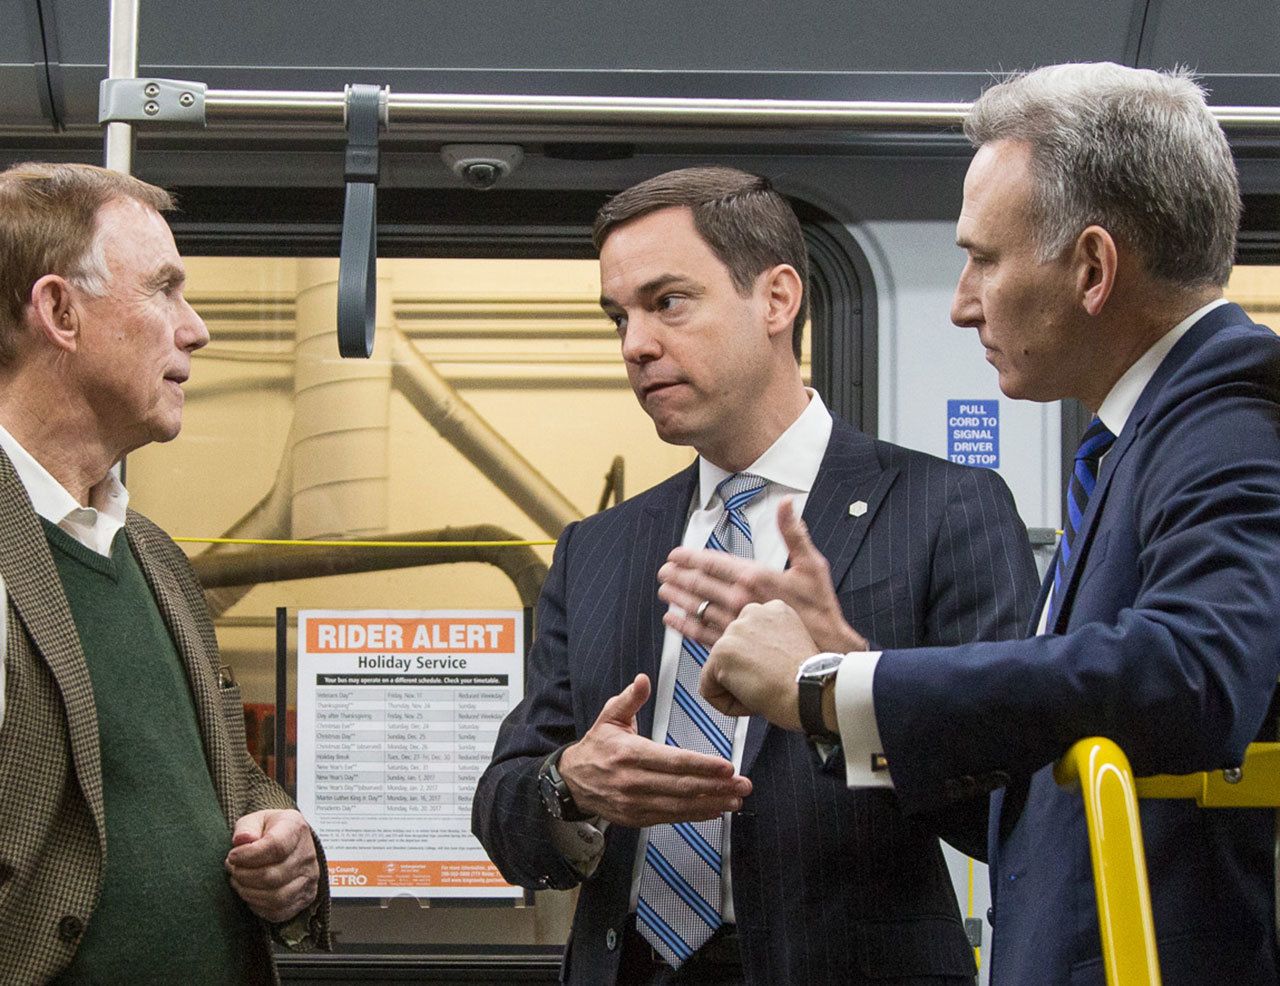 King County Councilmember Pete von Reichbauer, left, discusses King County’s purchase of electric battery buses with Proterra CEO Ryan Popple, middle, and King County Executive Dow Constantine. COURTESY PHOTO